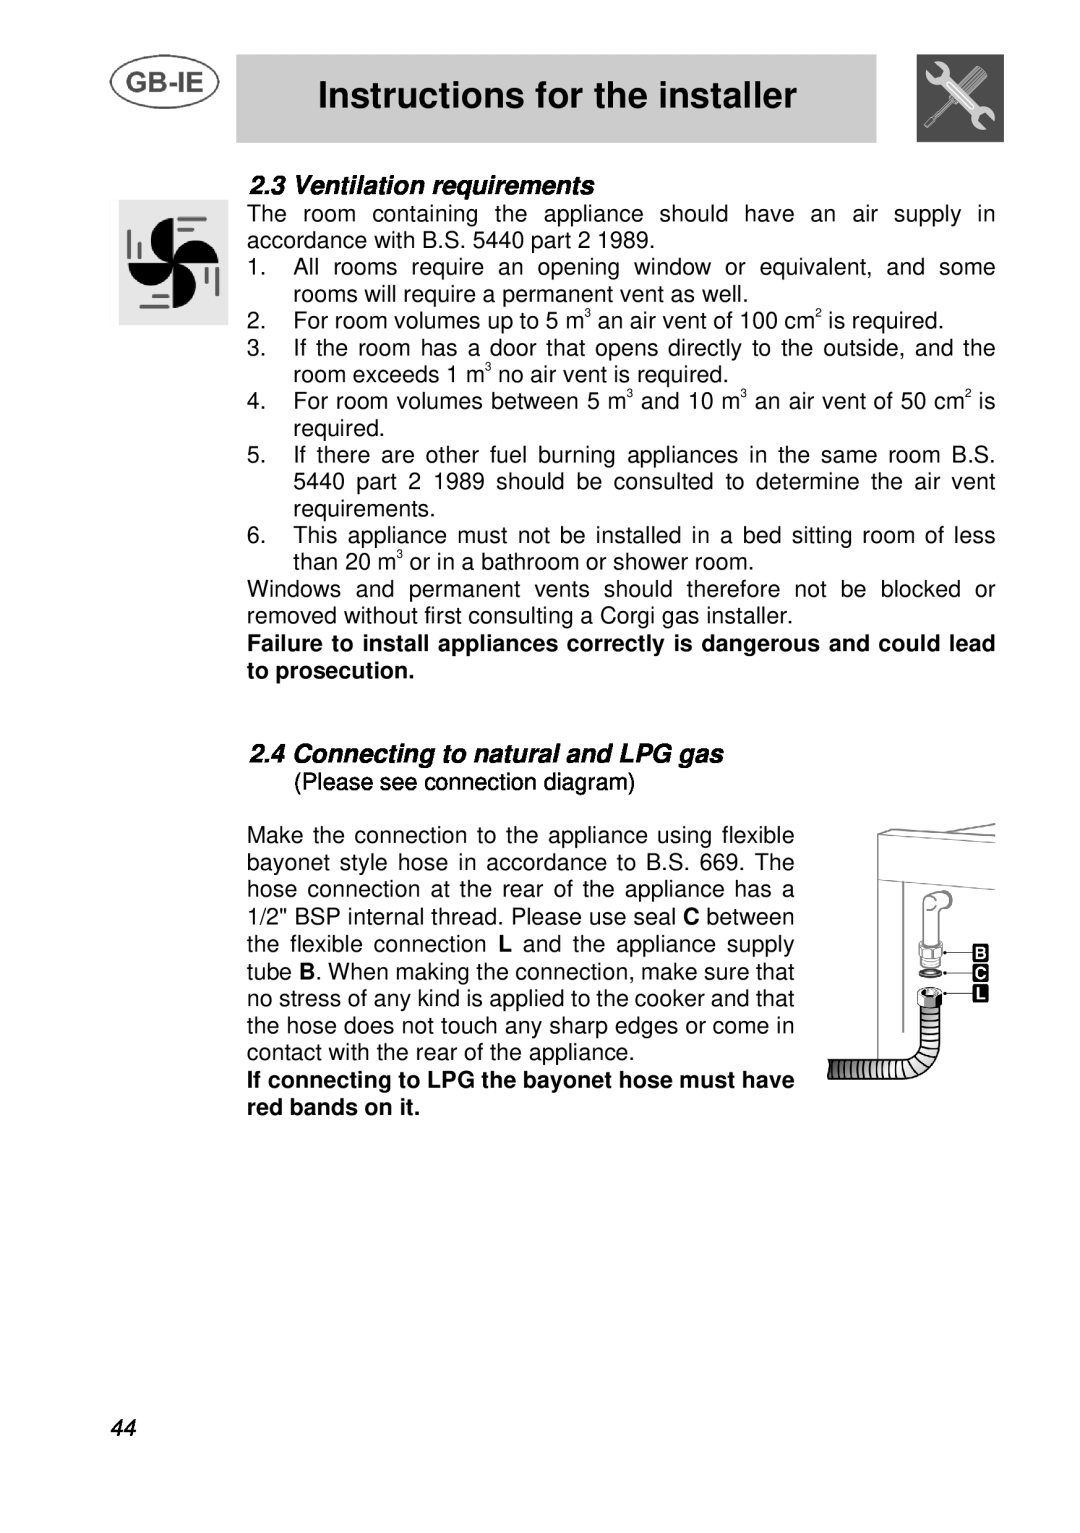 Smeg A3 manual Ventilation requirements, Connecting to natural and LPG gas, Instructions for the installer 